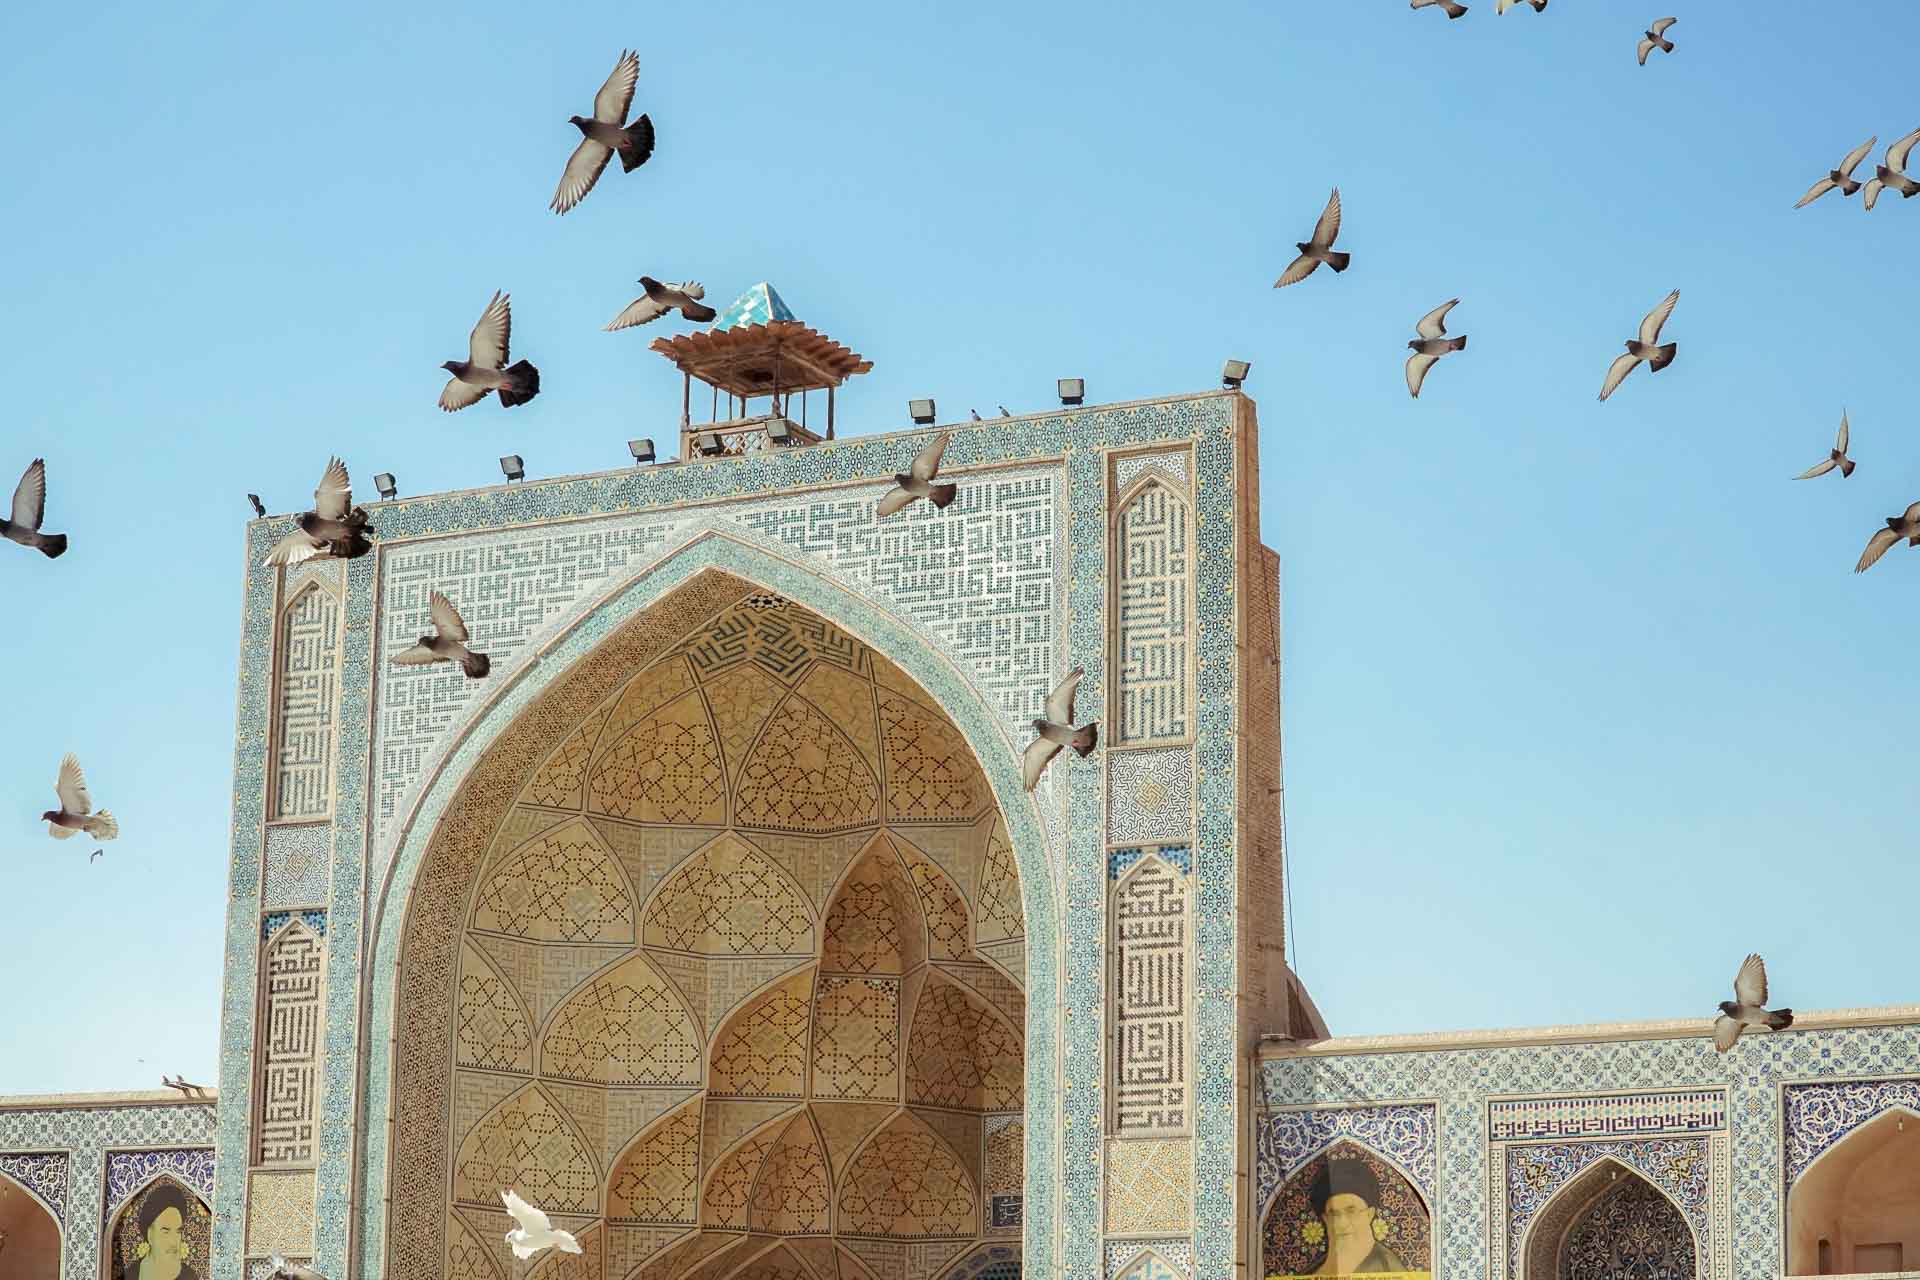 Many birds flying in front of the mosque in Iran